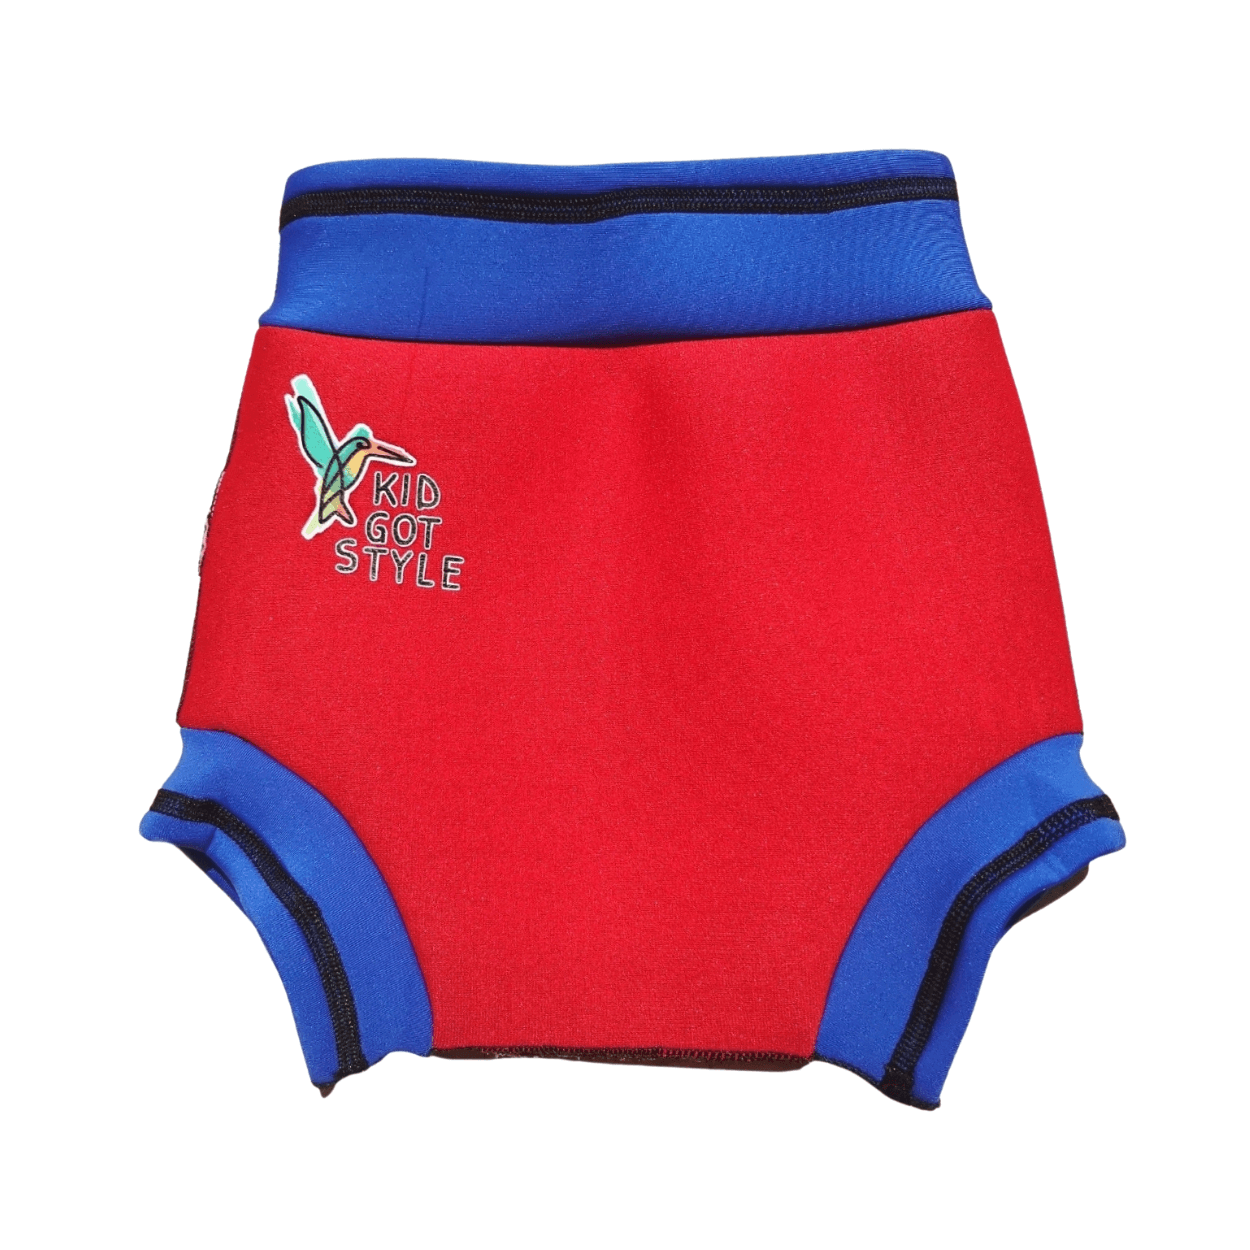 Red reusable swim nappy with blue trim